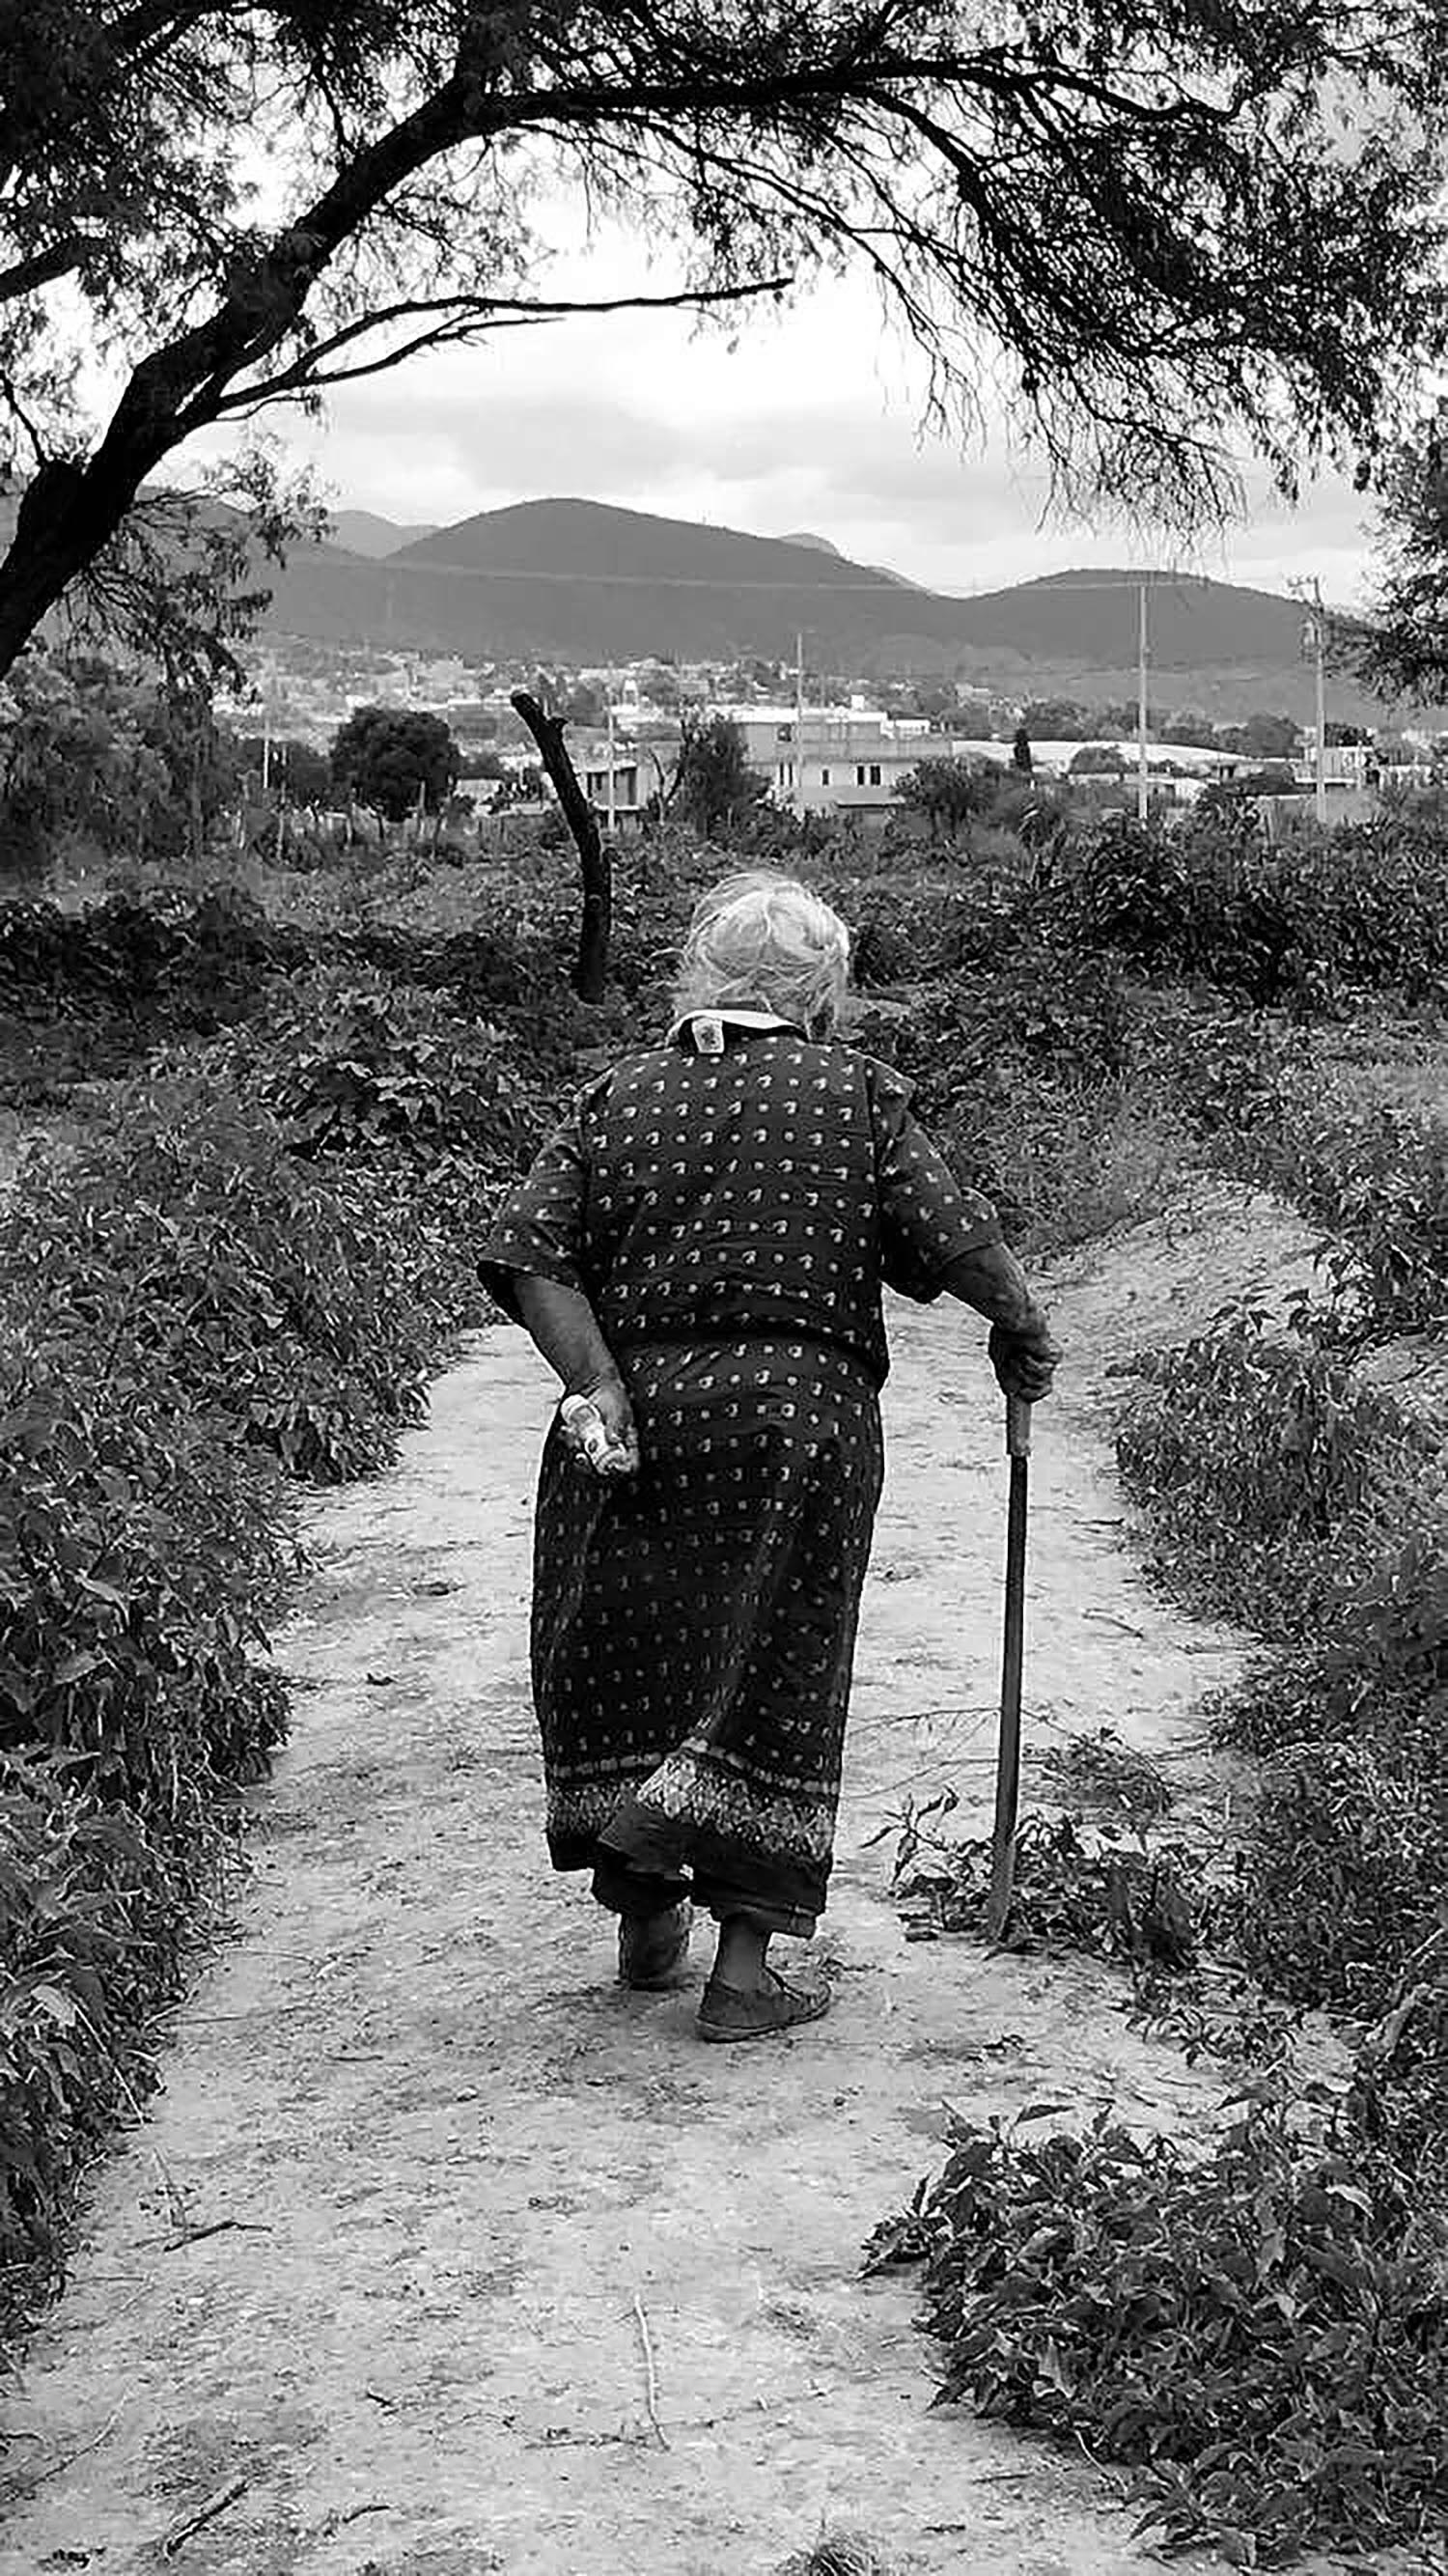 Delila Flores '19 won Best Photo of Daily Life for her image titled “Machete Abuela," taken in San Vincente, Puebla, México. "This is my bisabuela walking through the campo, the fields, where she uses her machete for her livelihood. She uses it to cut the weeds, to protect herself from the snakes, and as a walking stick. Despite being 92 years old, she is still a strong woman who has defended her land and taught her daughters, my abuela and my mamá to do the same," Flores said.